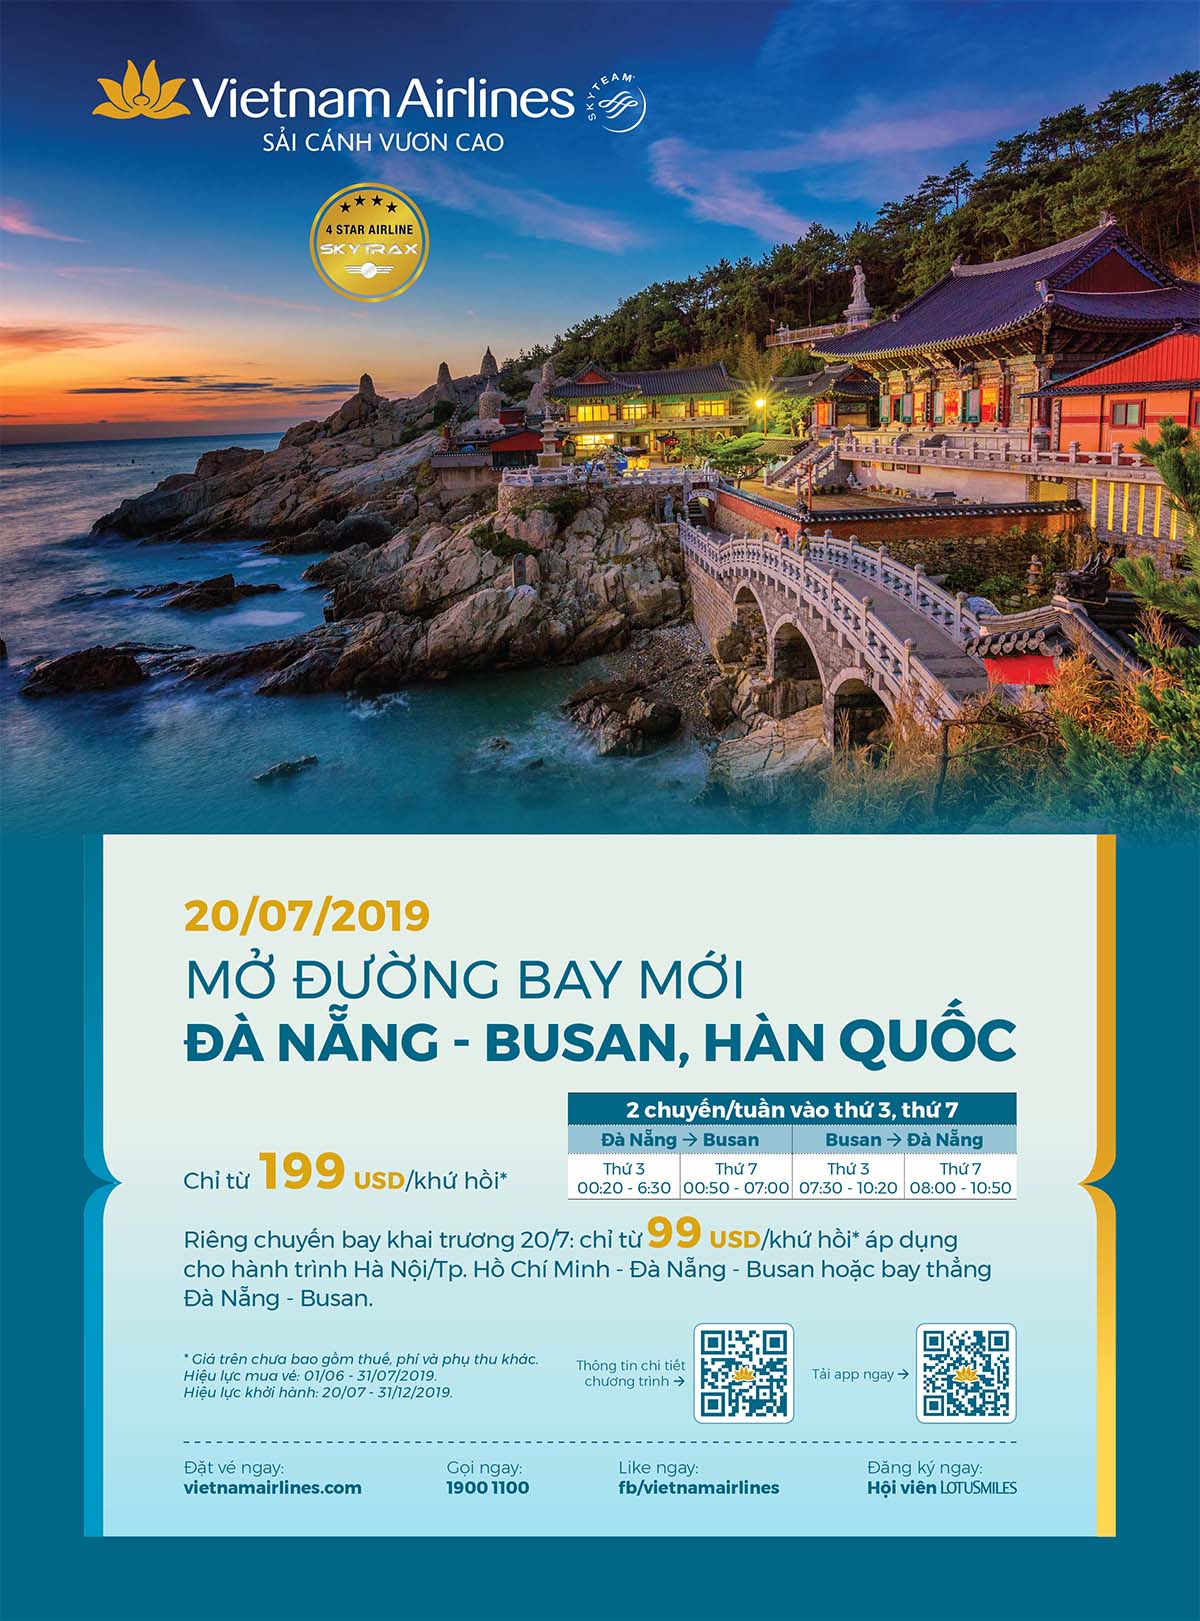 From 20 7 2019 Vietnam Airlines To Operate Danang Busan Direct Flight 02